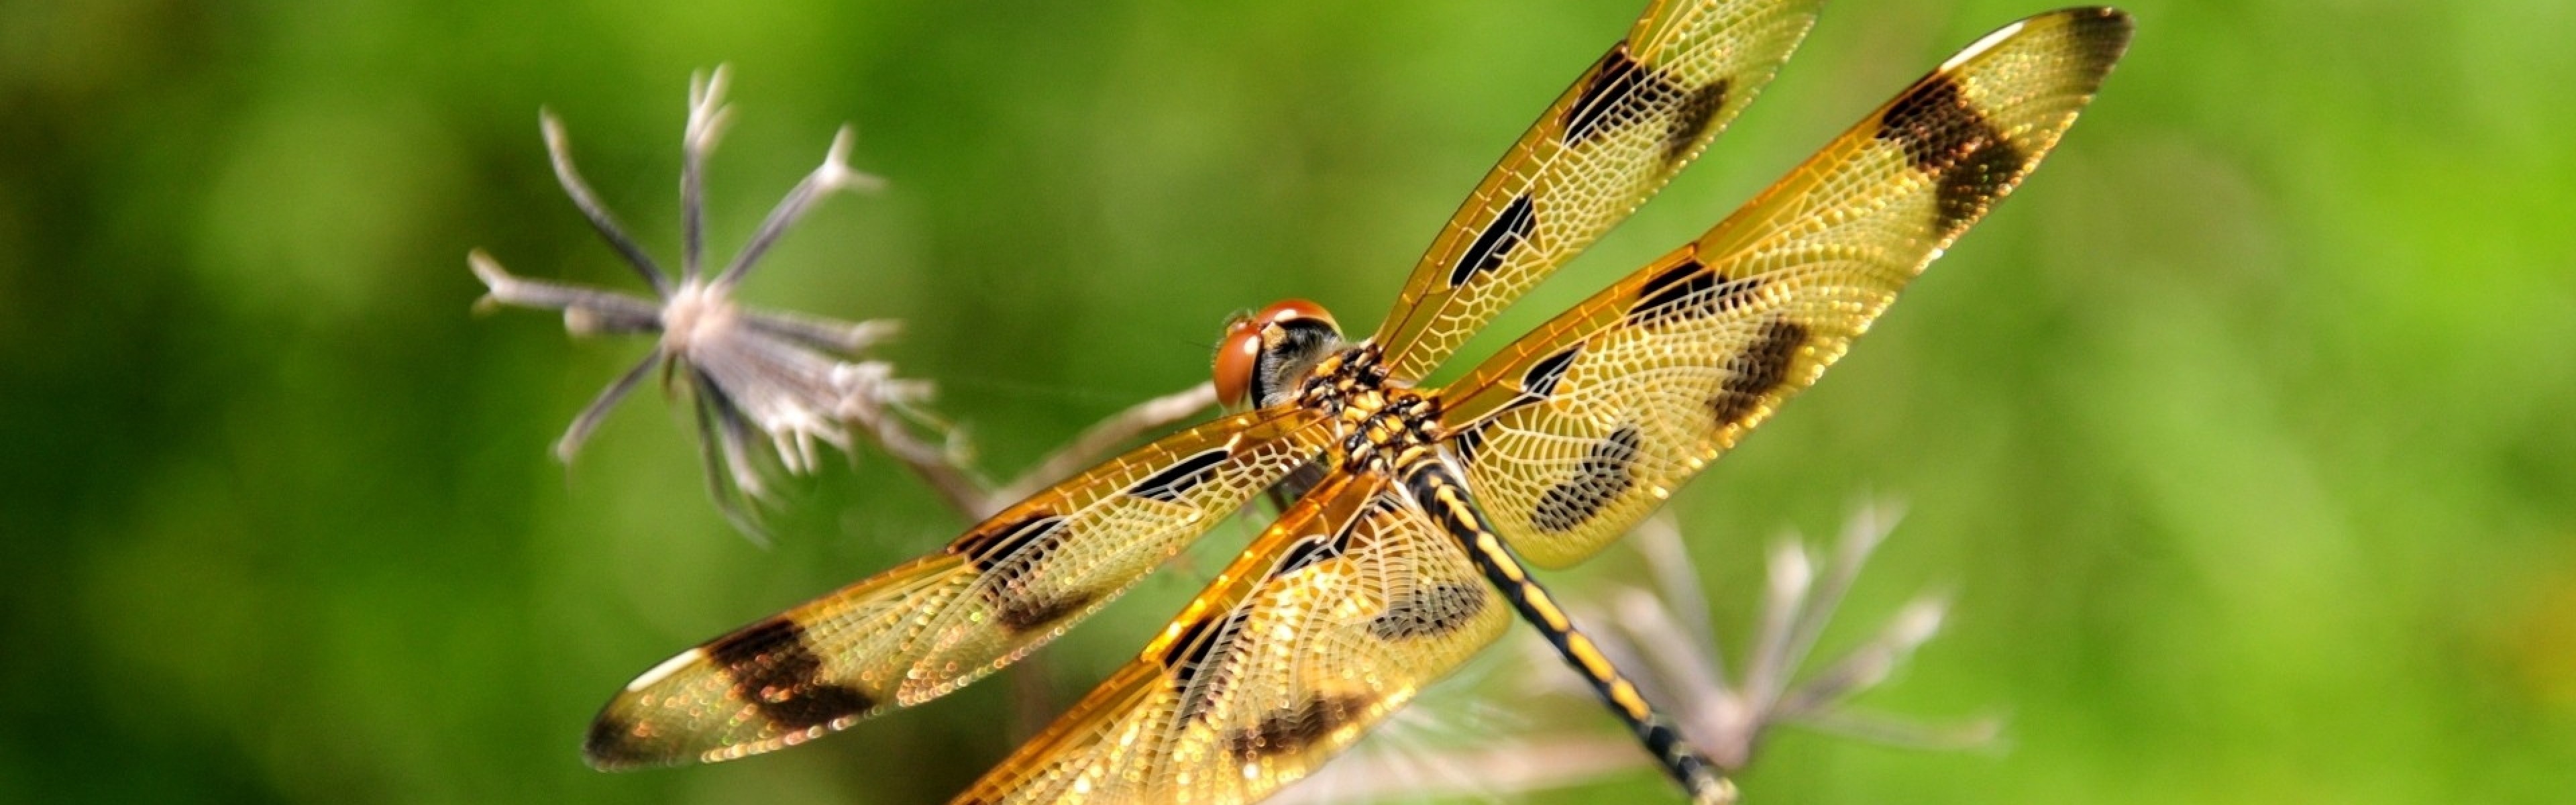 3840x1200  Wallpaper dragonfly, insect, flying, grass